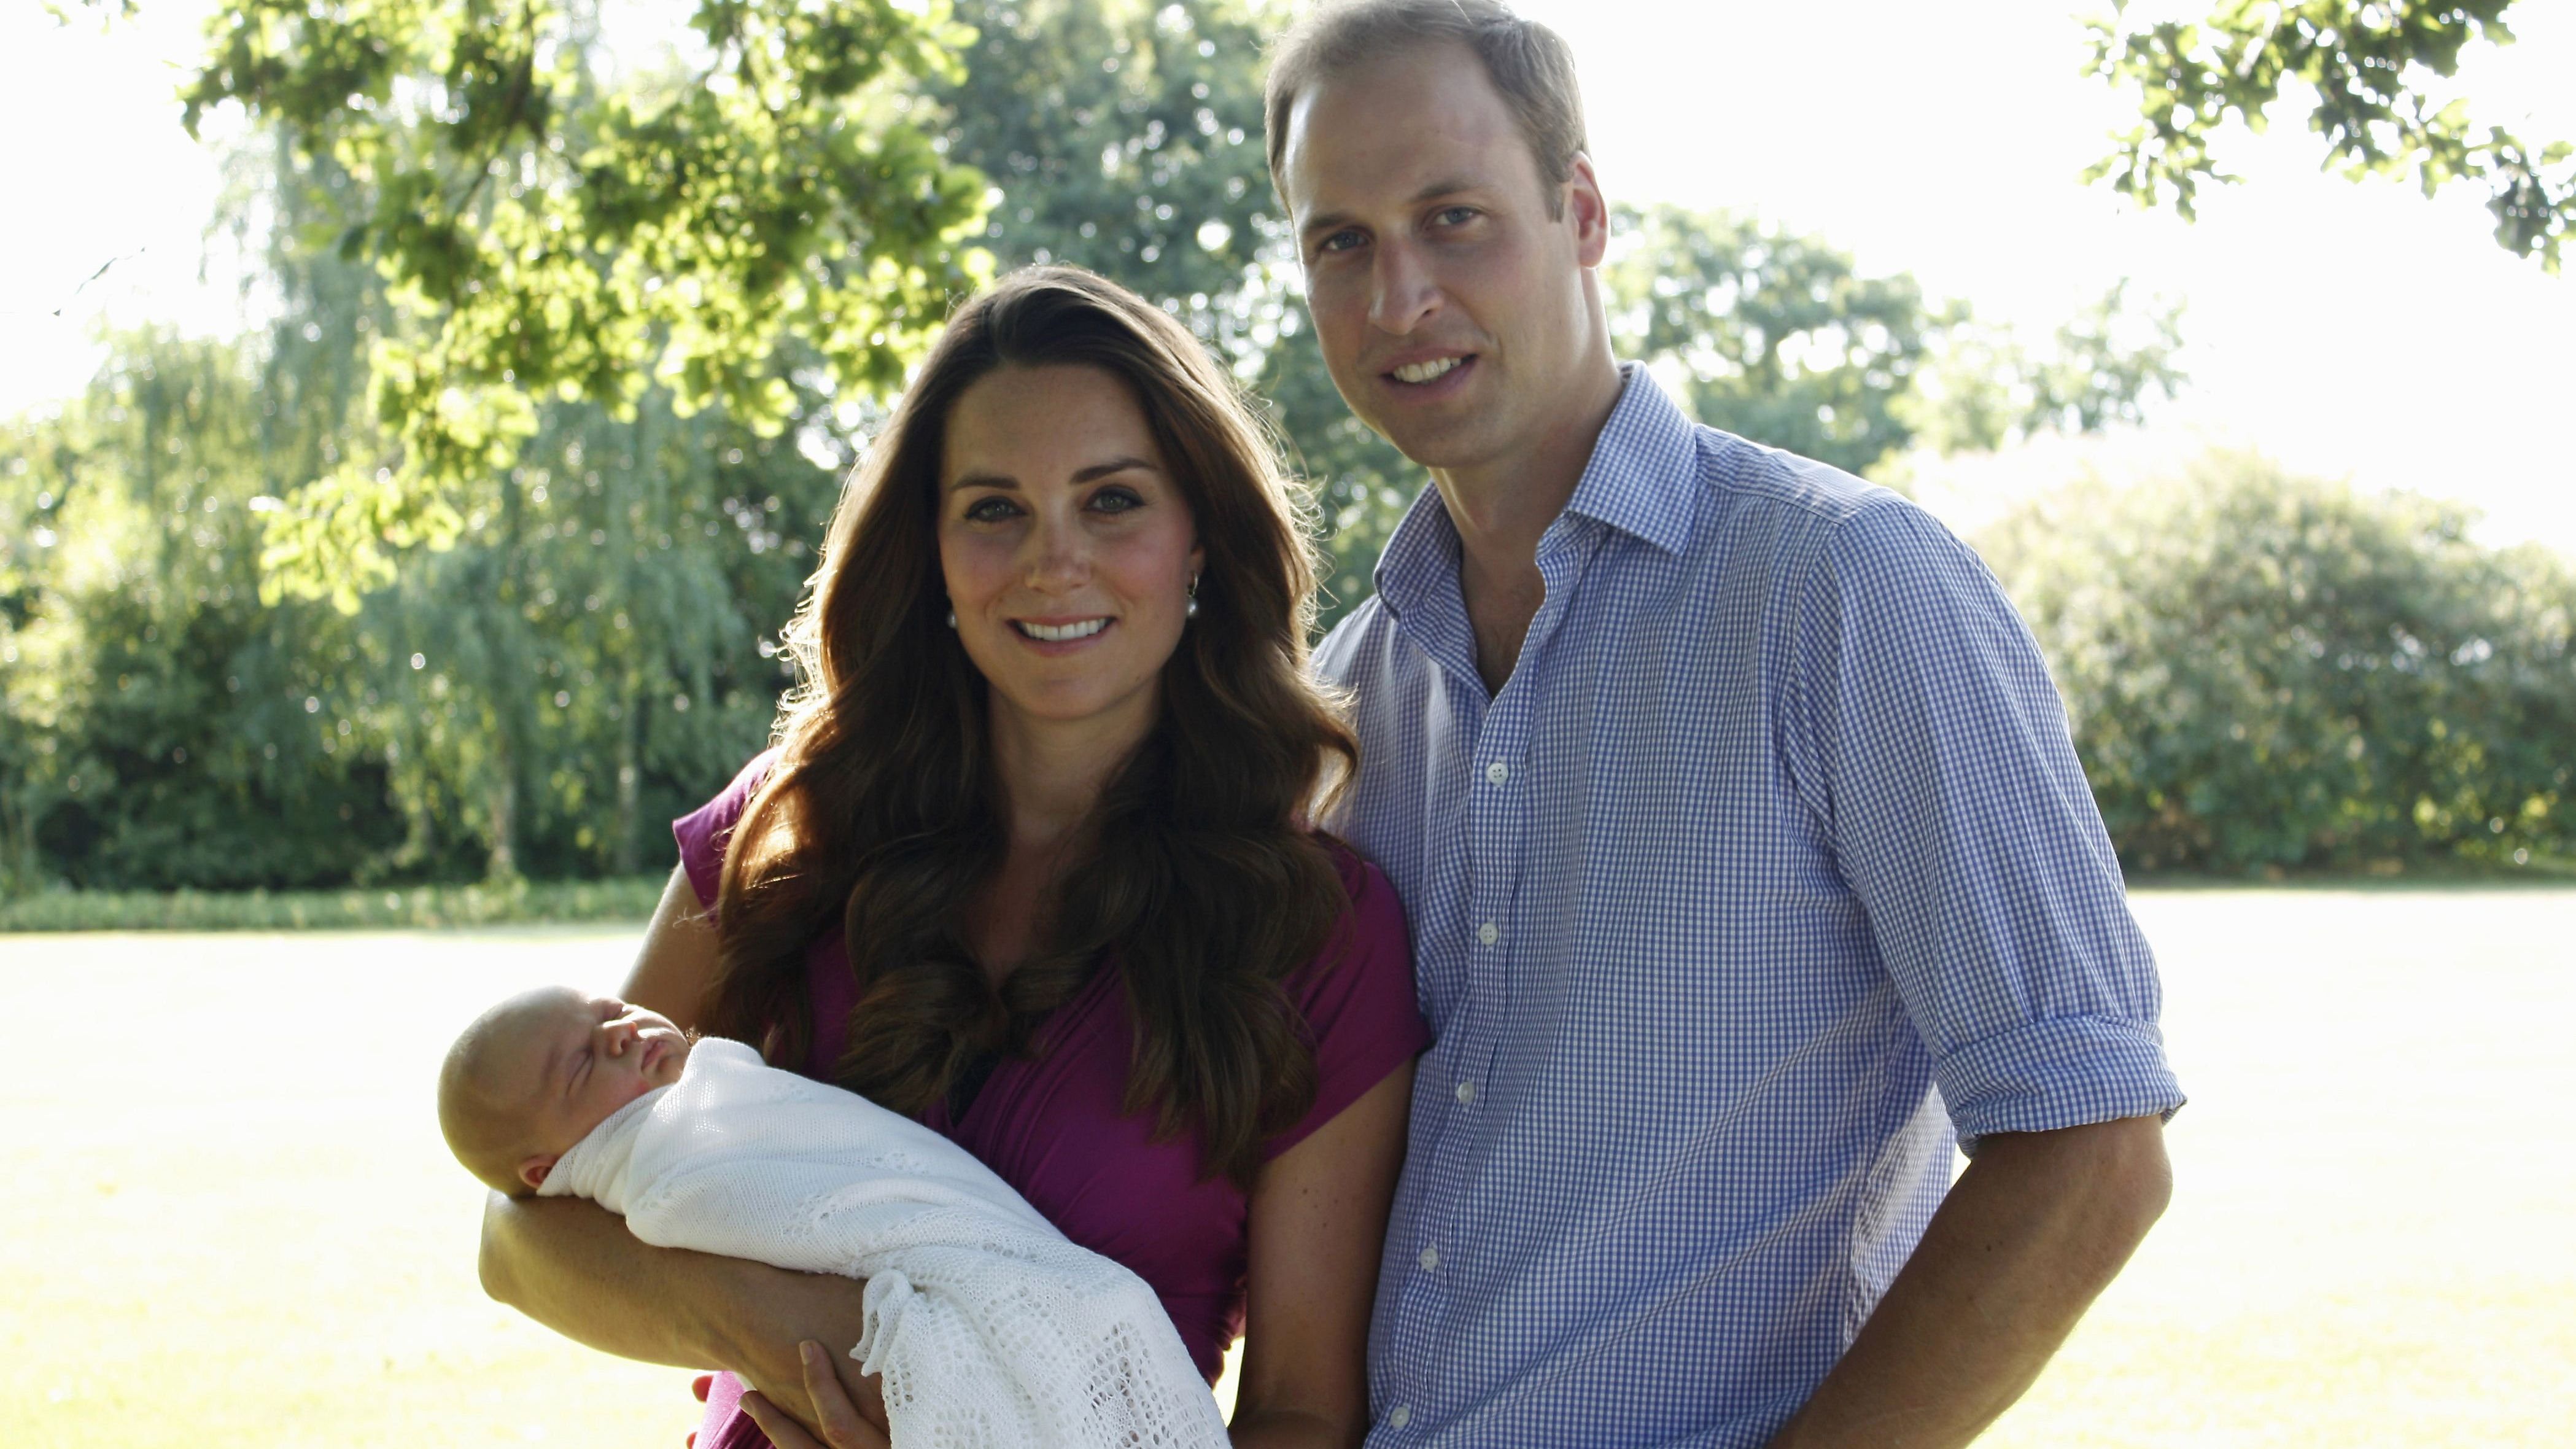 The couple are pictured with their newborn boy, Prince George, in 2013. The new parents released two family photographs taken by Michael Middleton, Catherine's father.